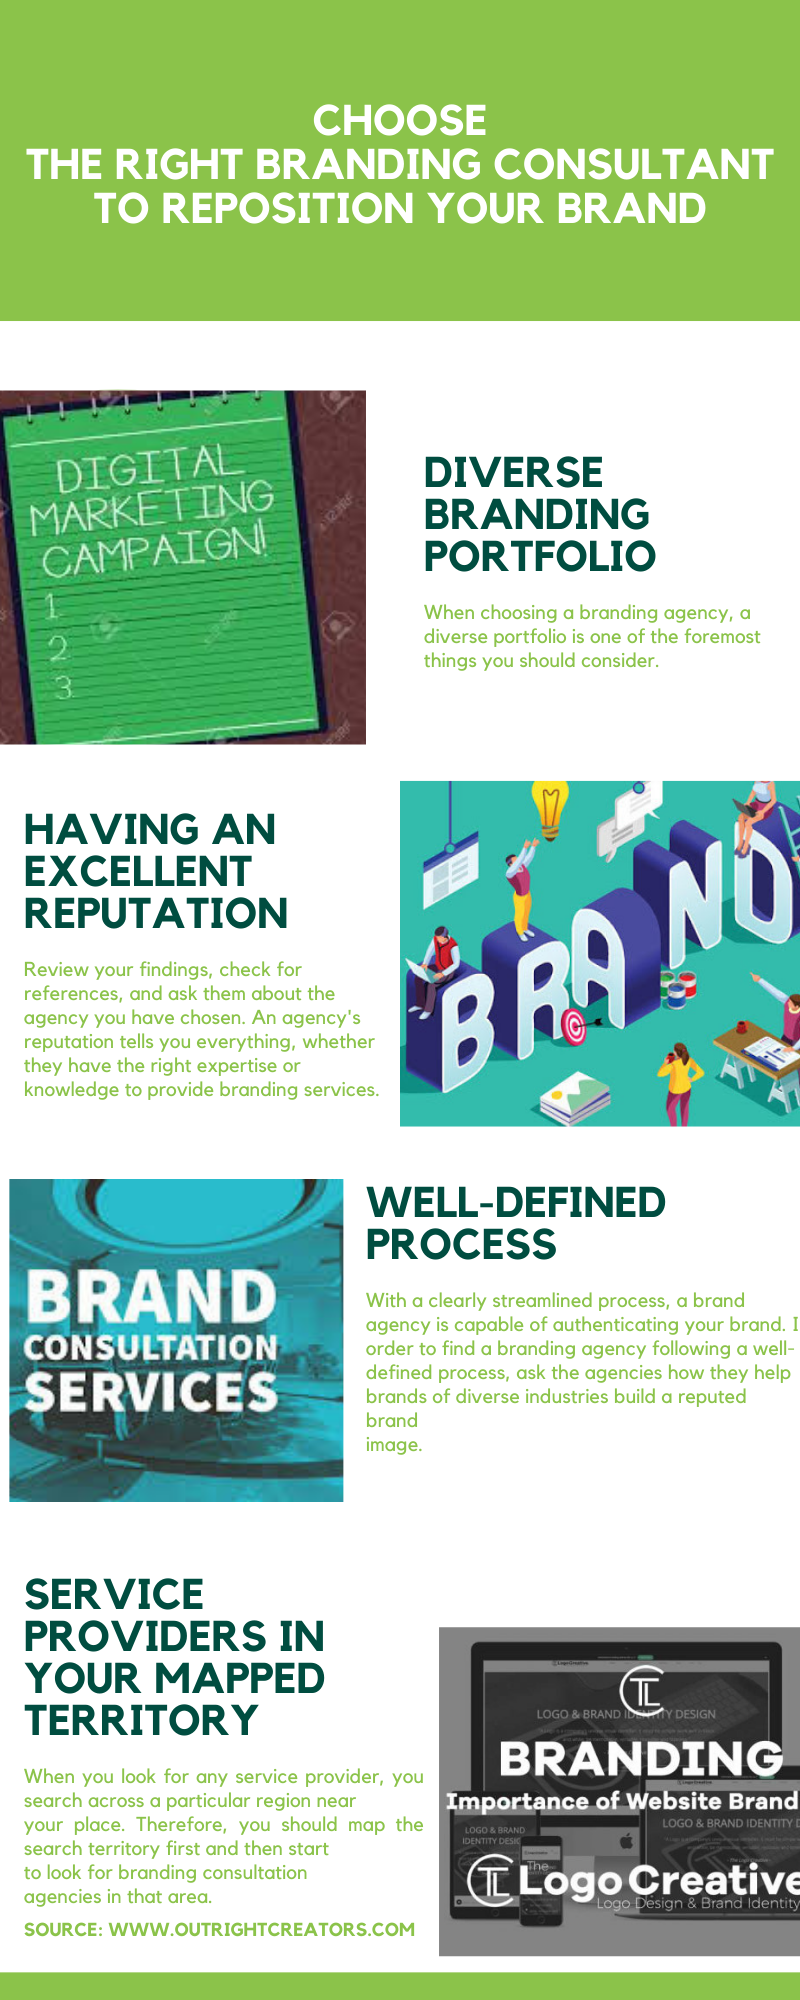 Choose the Right Branding Consultant to Reposition Your Brand